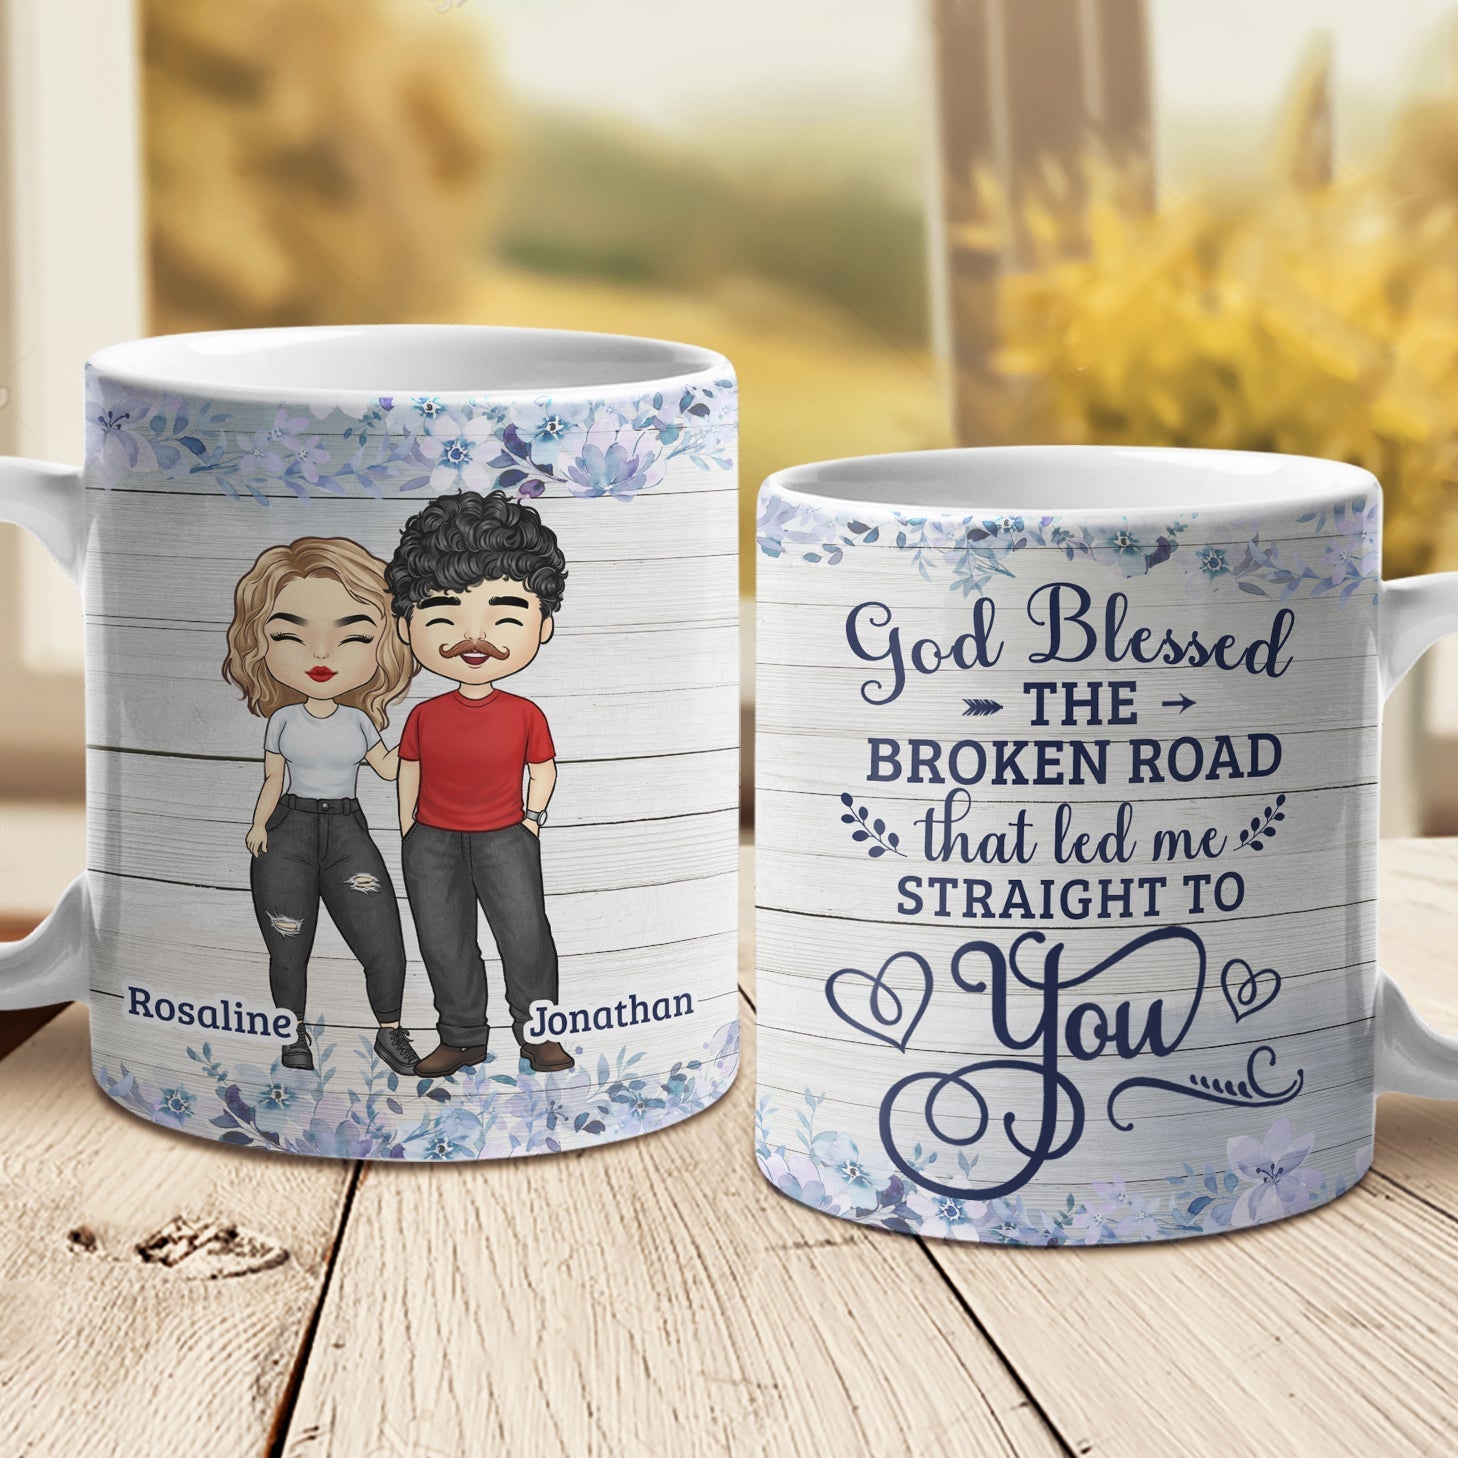 God Blessed The Broken Road That Led Me Straight To You - Gift For Couples, Personalized Mug